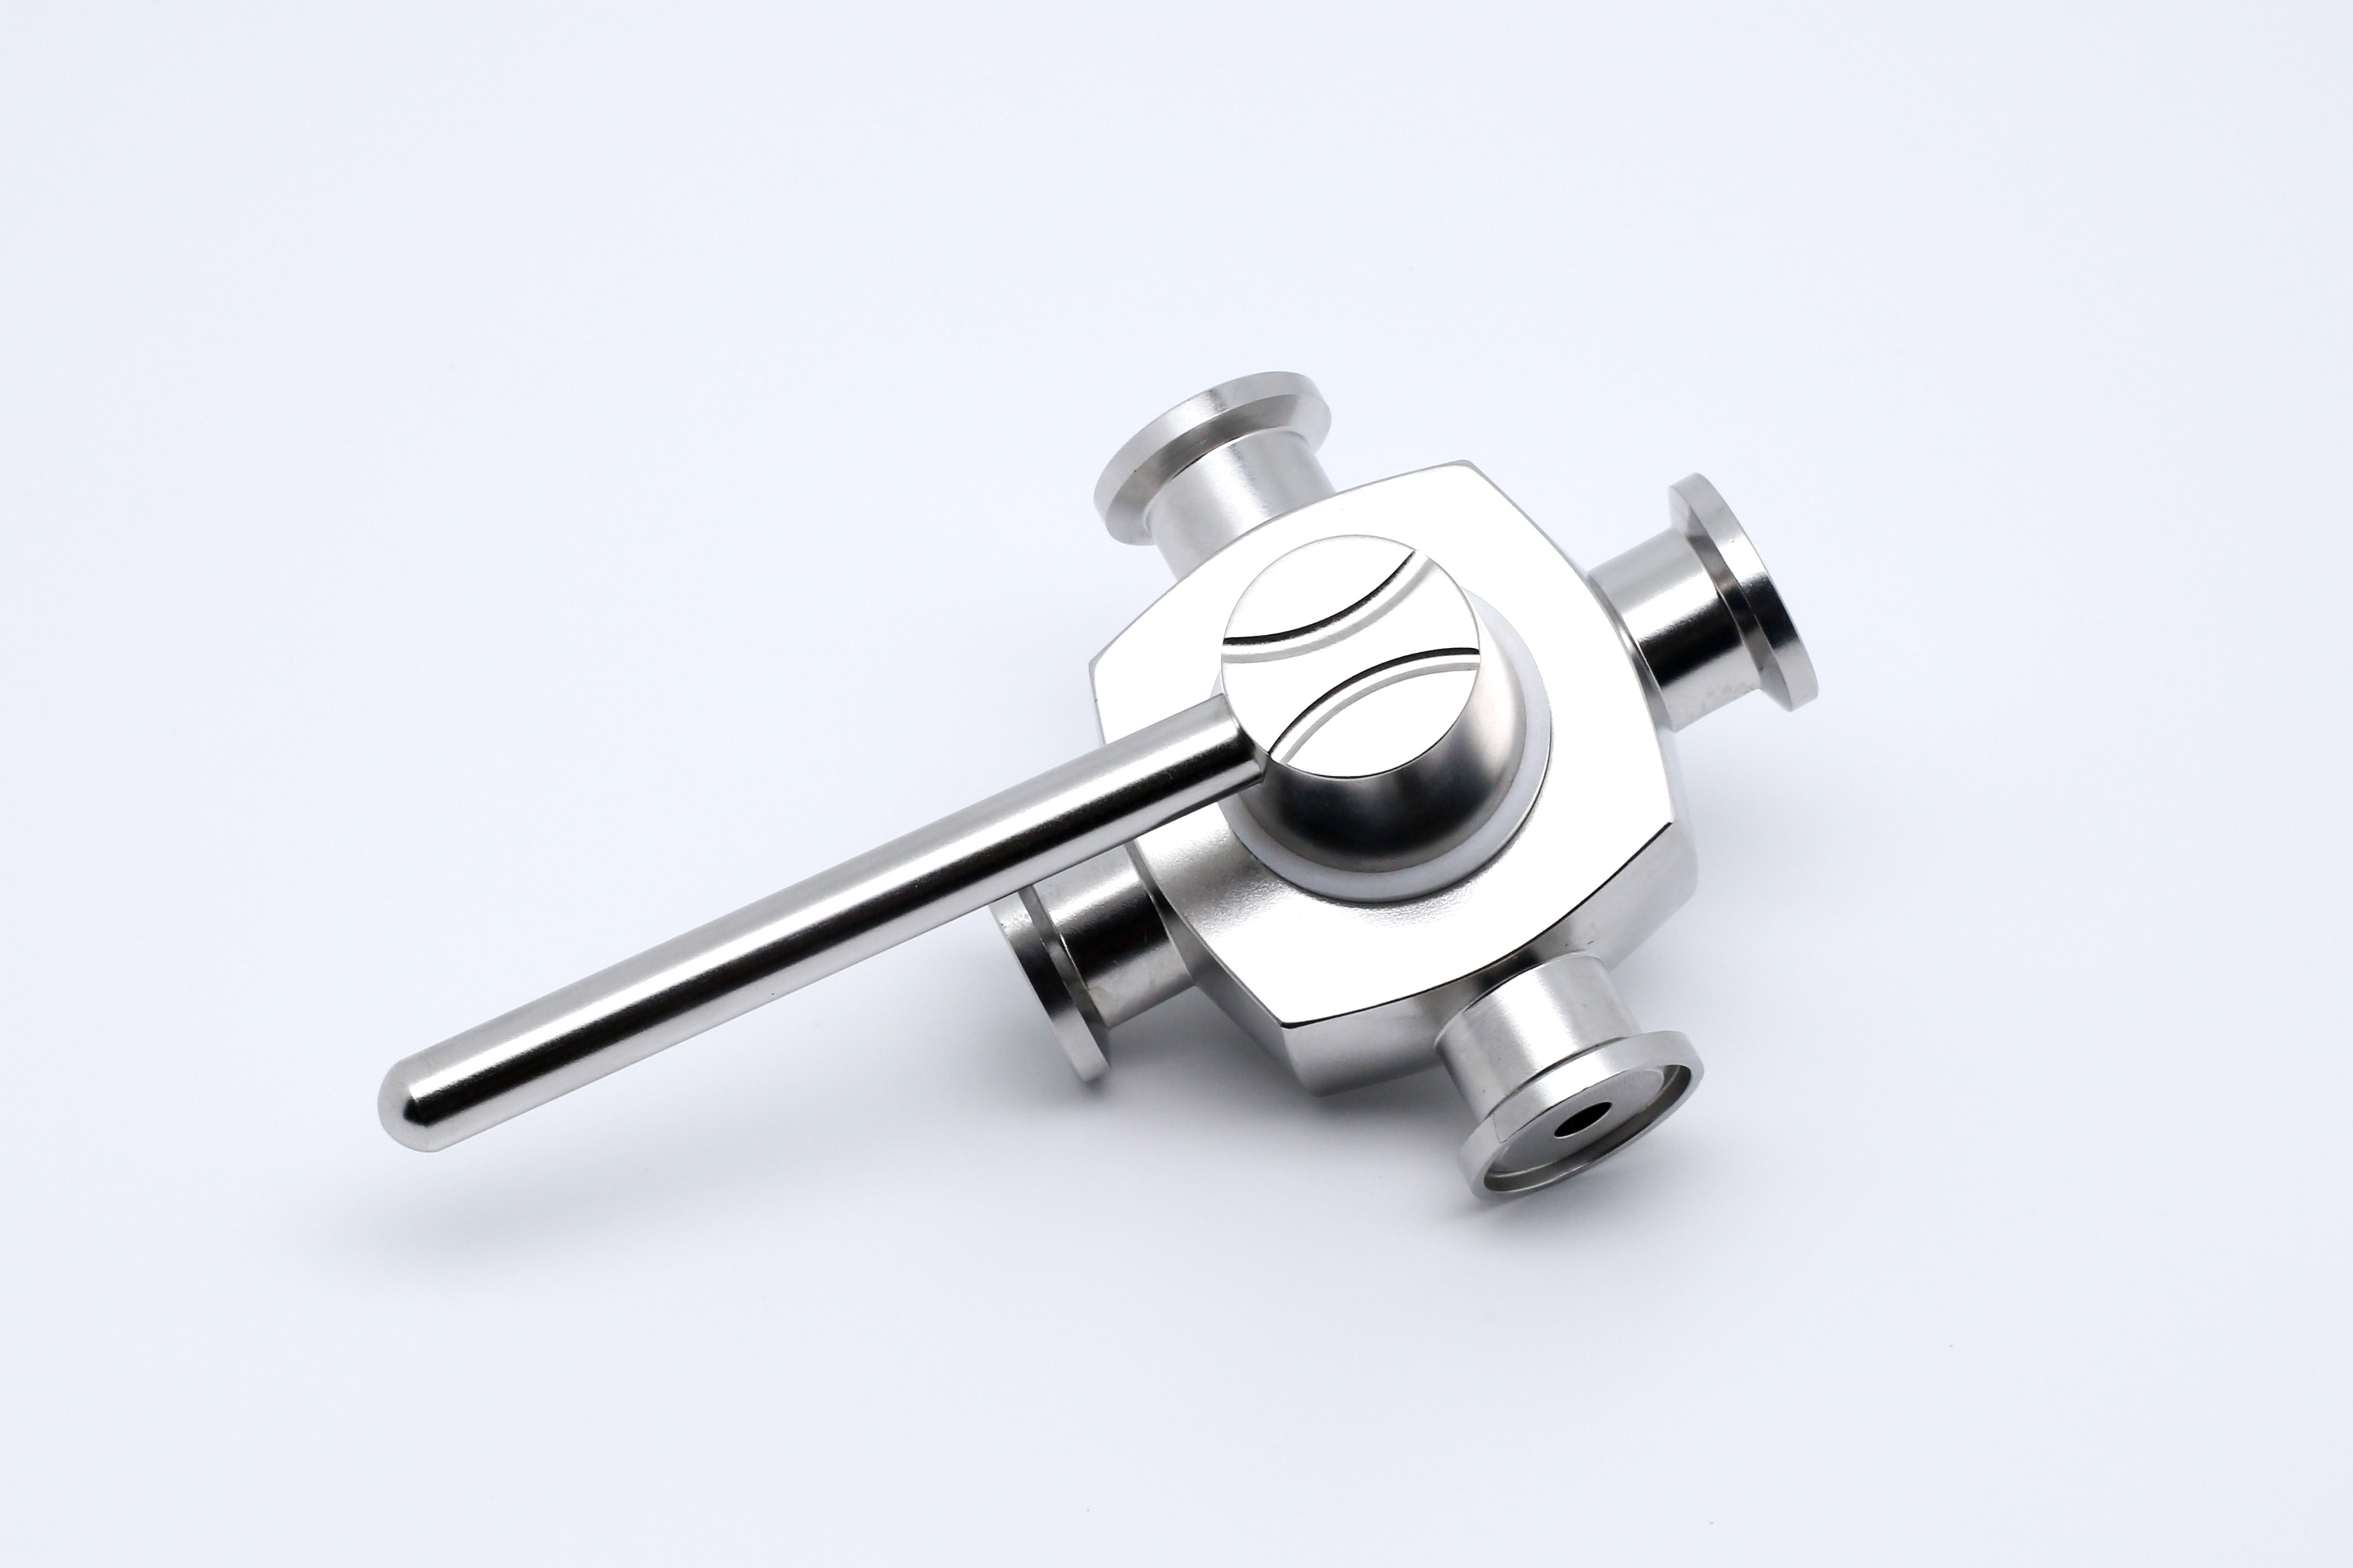 Four-position two-way valve consists of 316L stainless steel valve body, PTFE valve core and handle. ;The body has four positions and the handle has one guide curve, indicating the connection of two positions (which the guide curve is pointing to) and the closure of the other two when turning the handle.